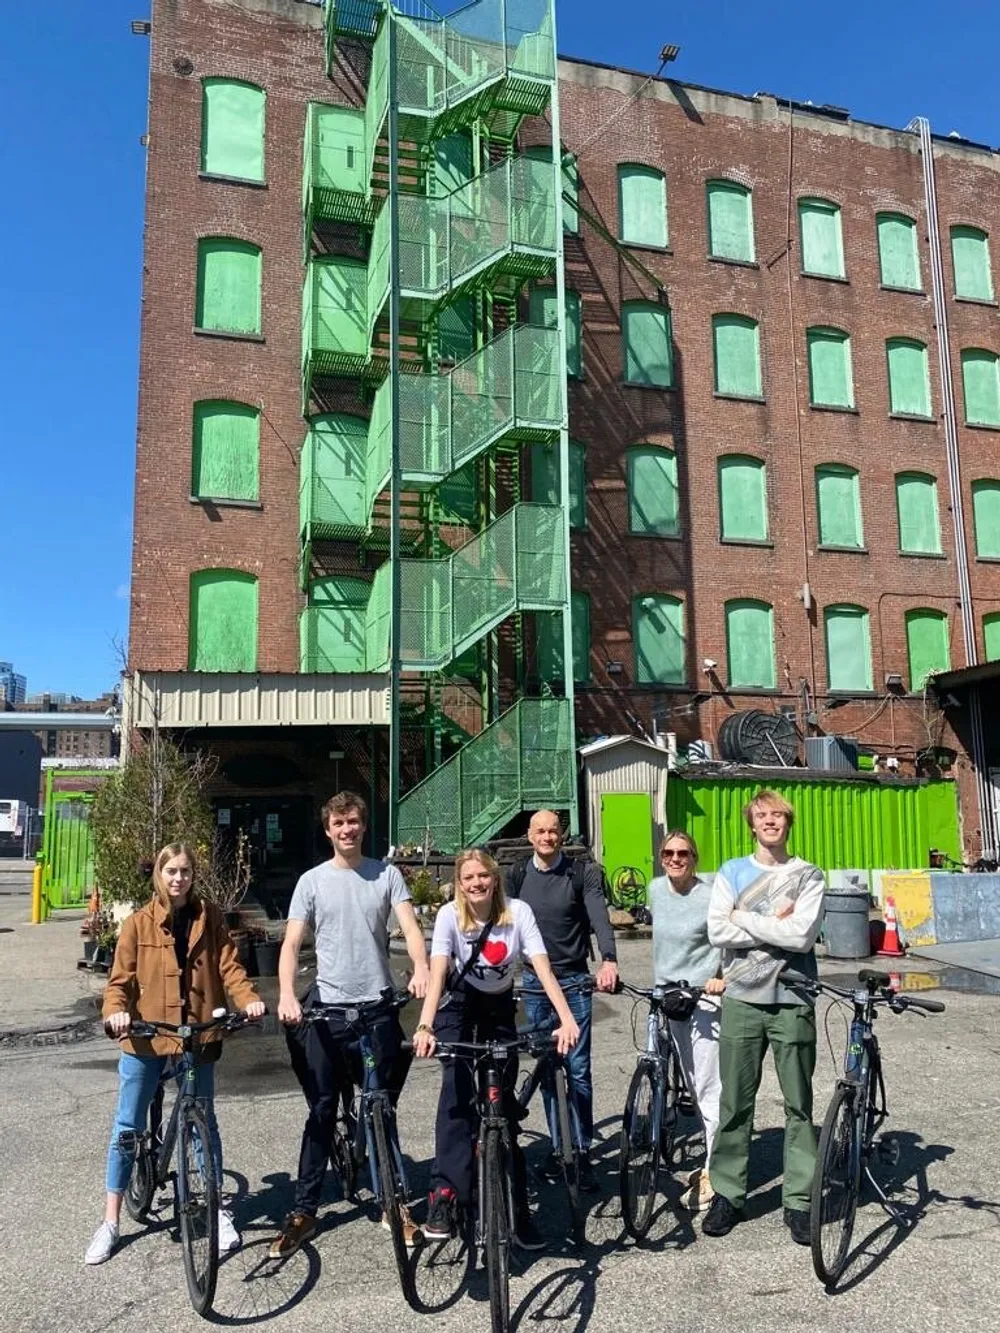 A group of six individuals are standing with bicycles in front of a brick building with a green fire escape under a clear blue sky